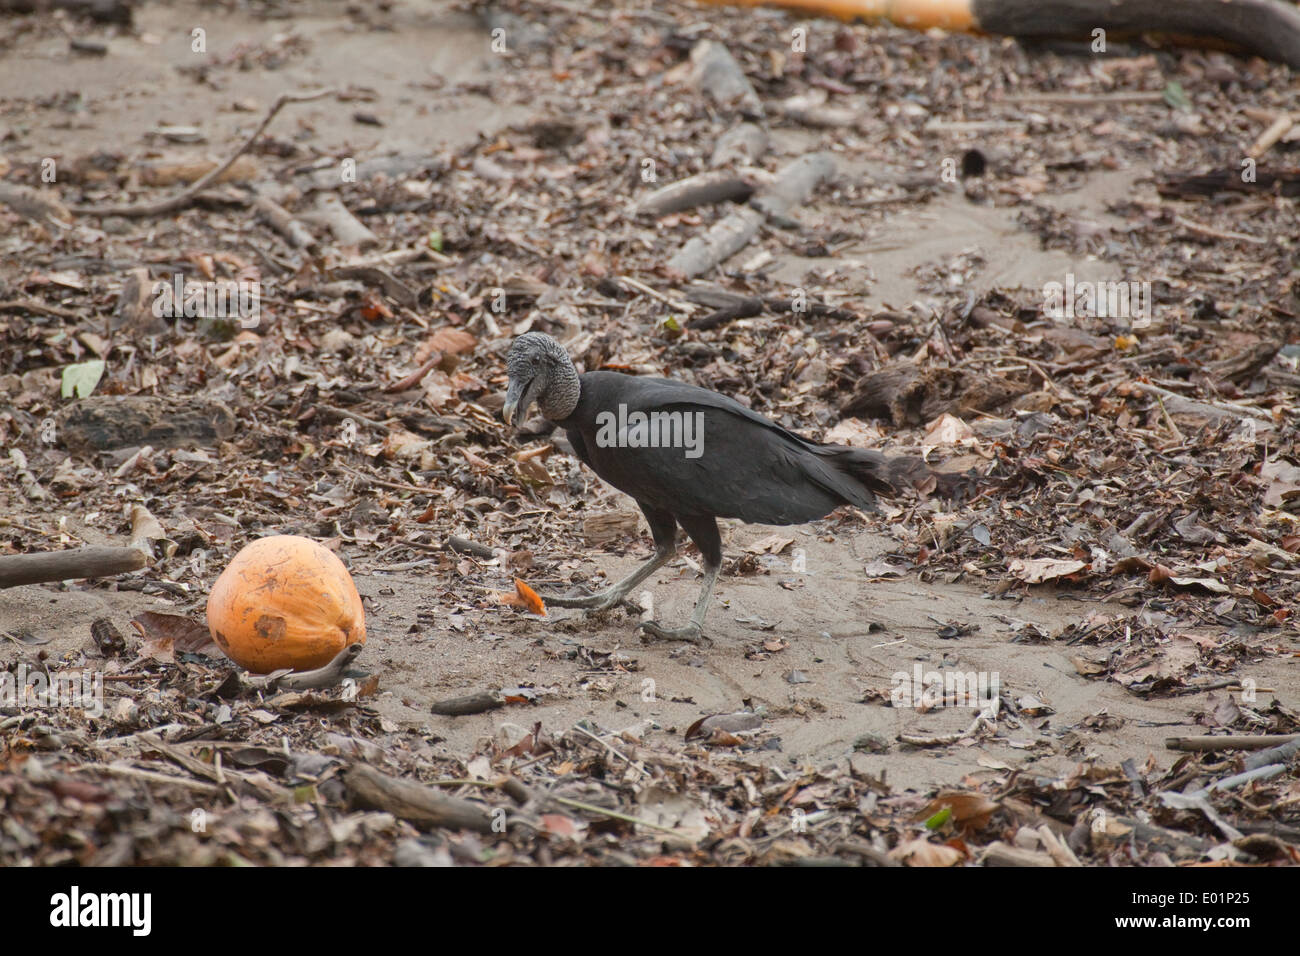 American Black Vulture (Coragyps atratus). Scavenging on beach tide line. About to investigate a washed up coconut. Stock Photo